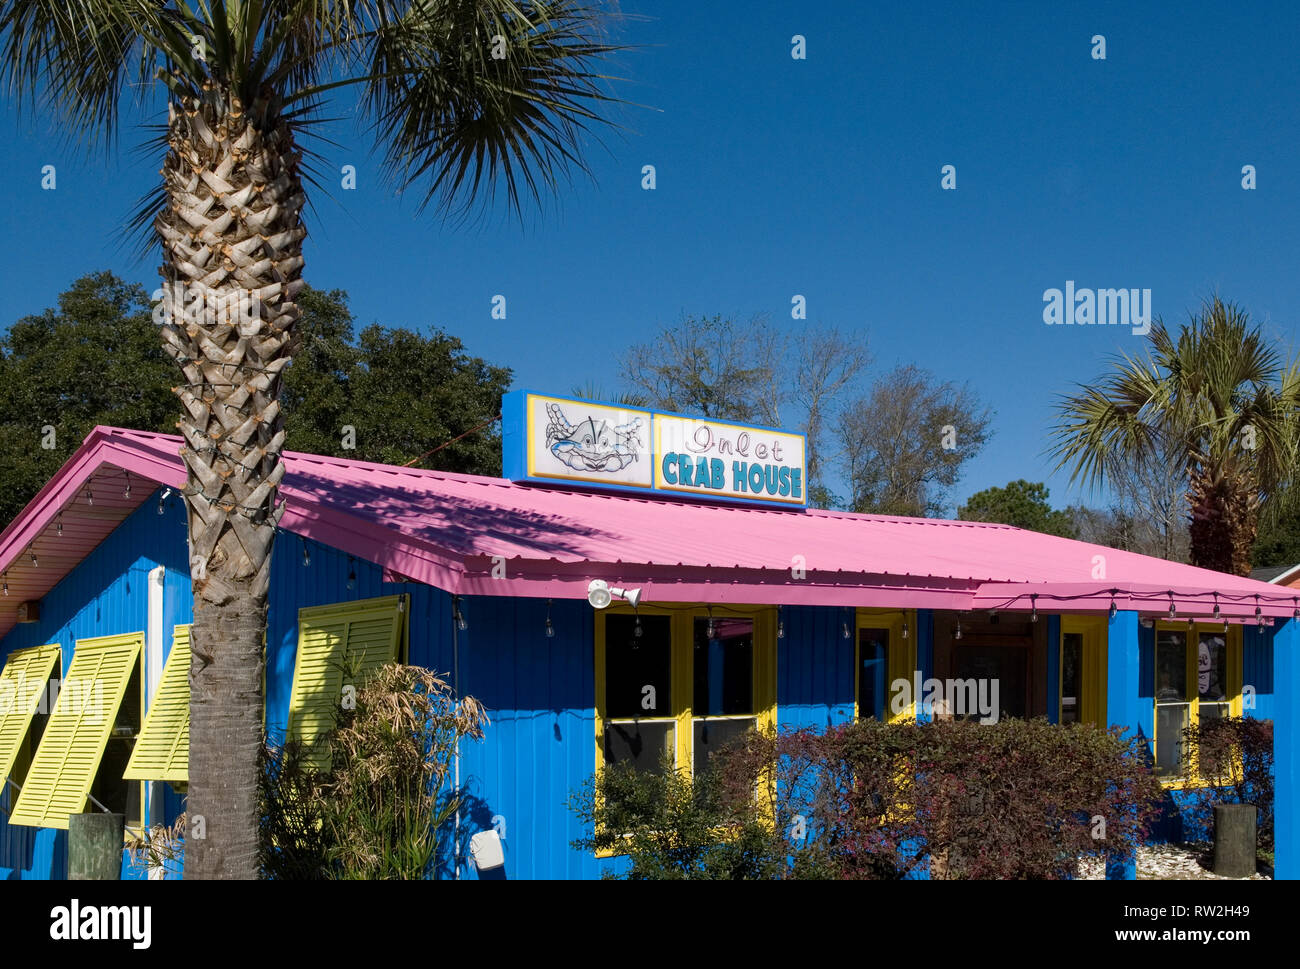 Captain Jimmy's Inlet Crab House Restaurant & Raw Bar in Murrells Inlet SC USA. Stockfoto